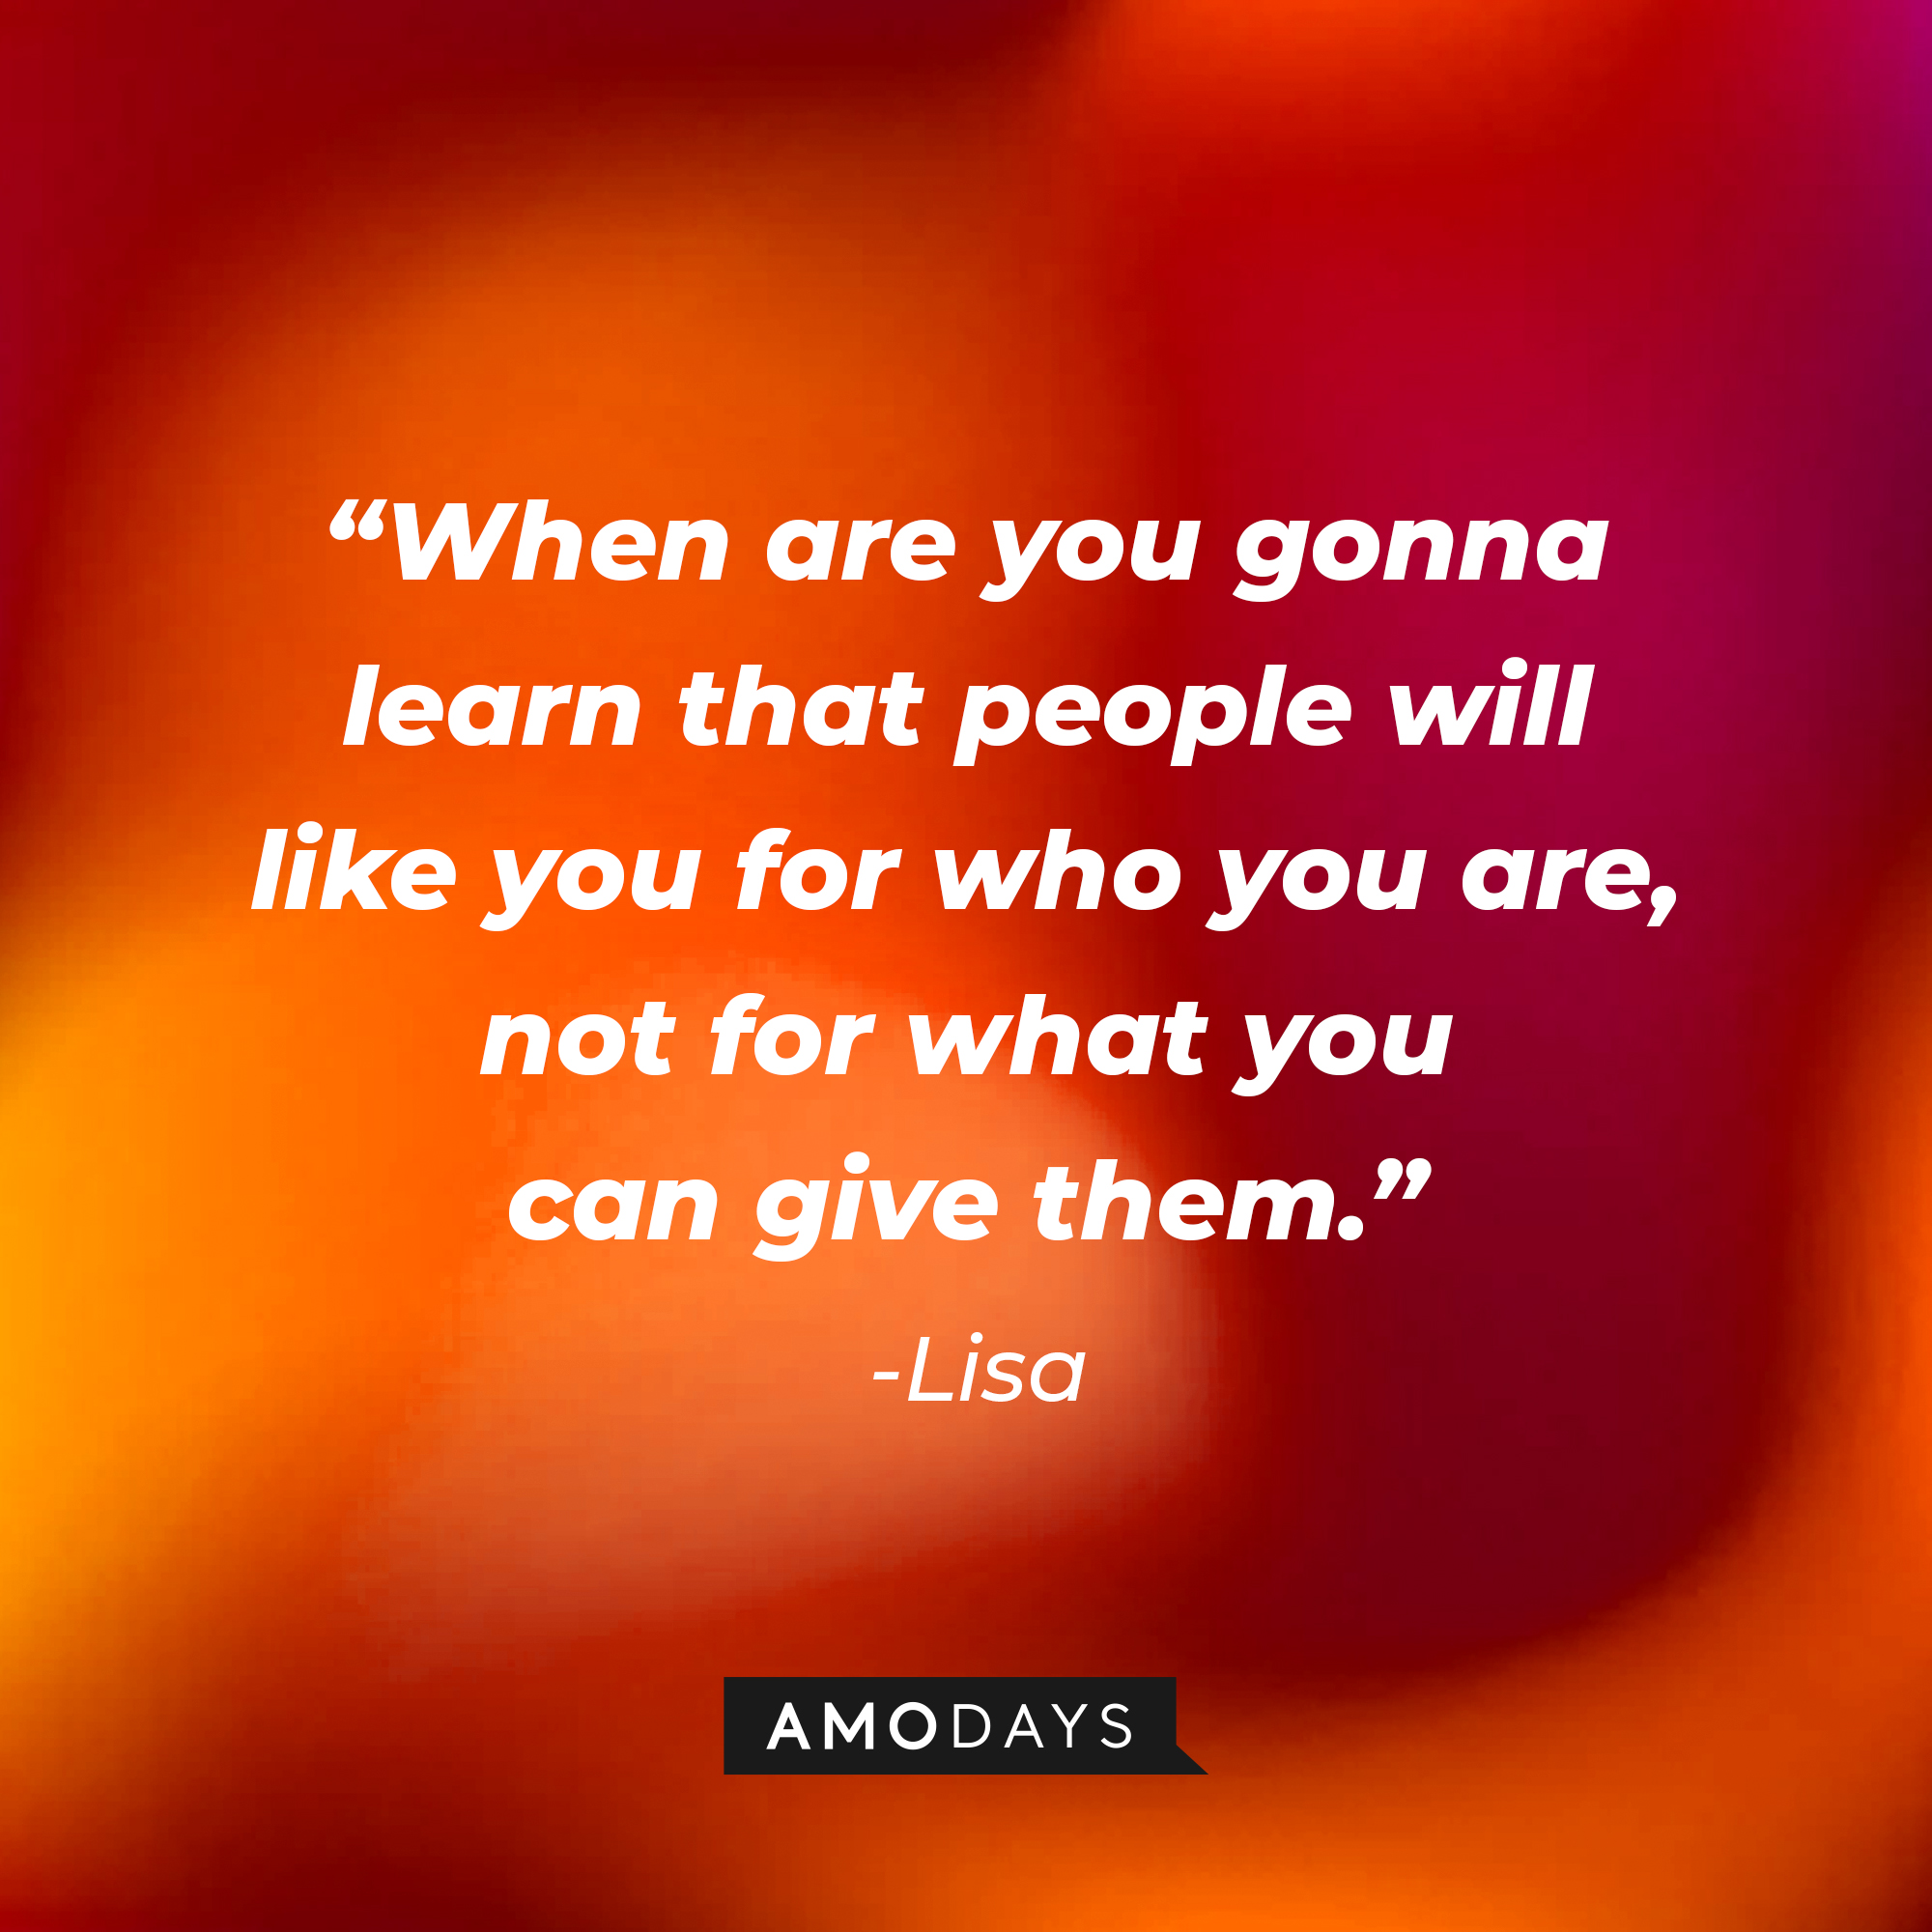 Lisa’s quote: “When are you gonna learn that people will like you for who you are, not for what you can give them.” | Source: AmoDays